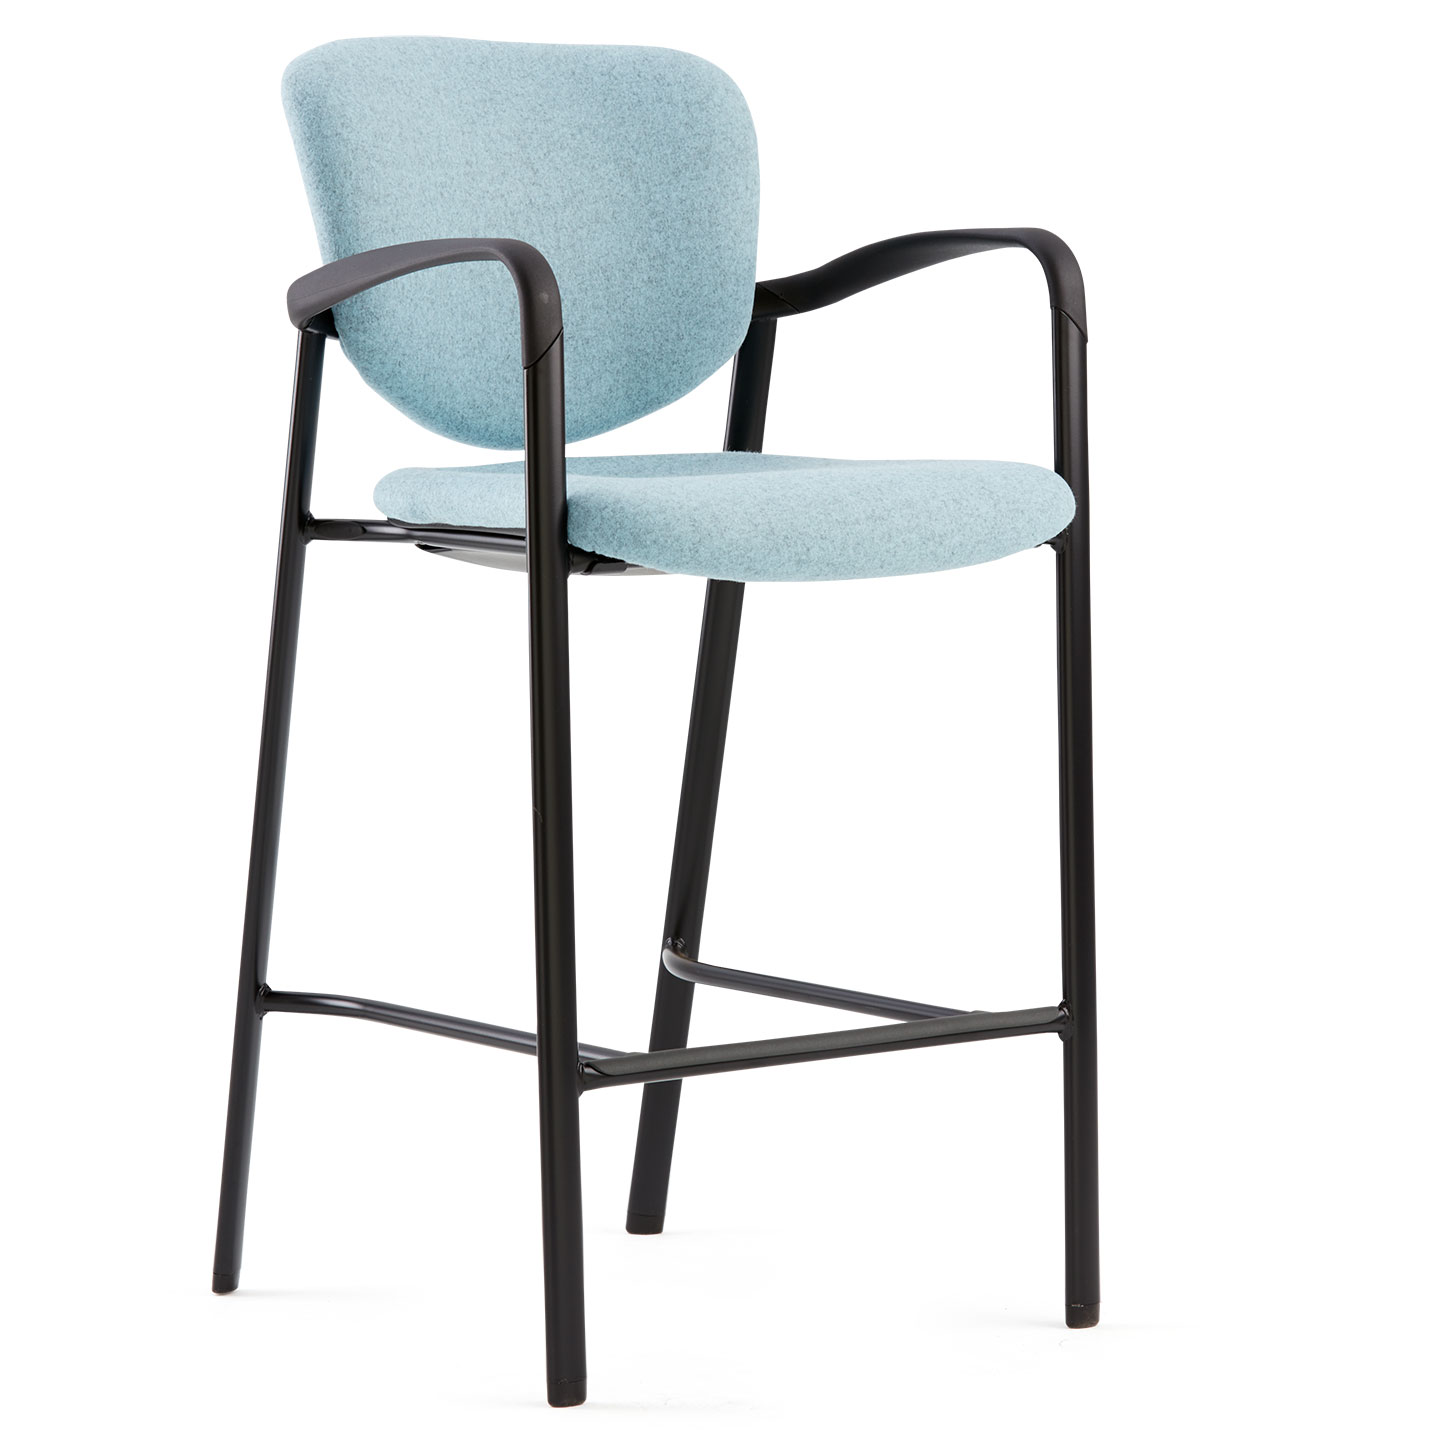 Haworth Improv stool with metal legs and light blue upholstery